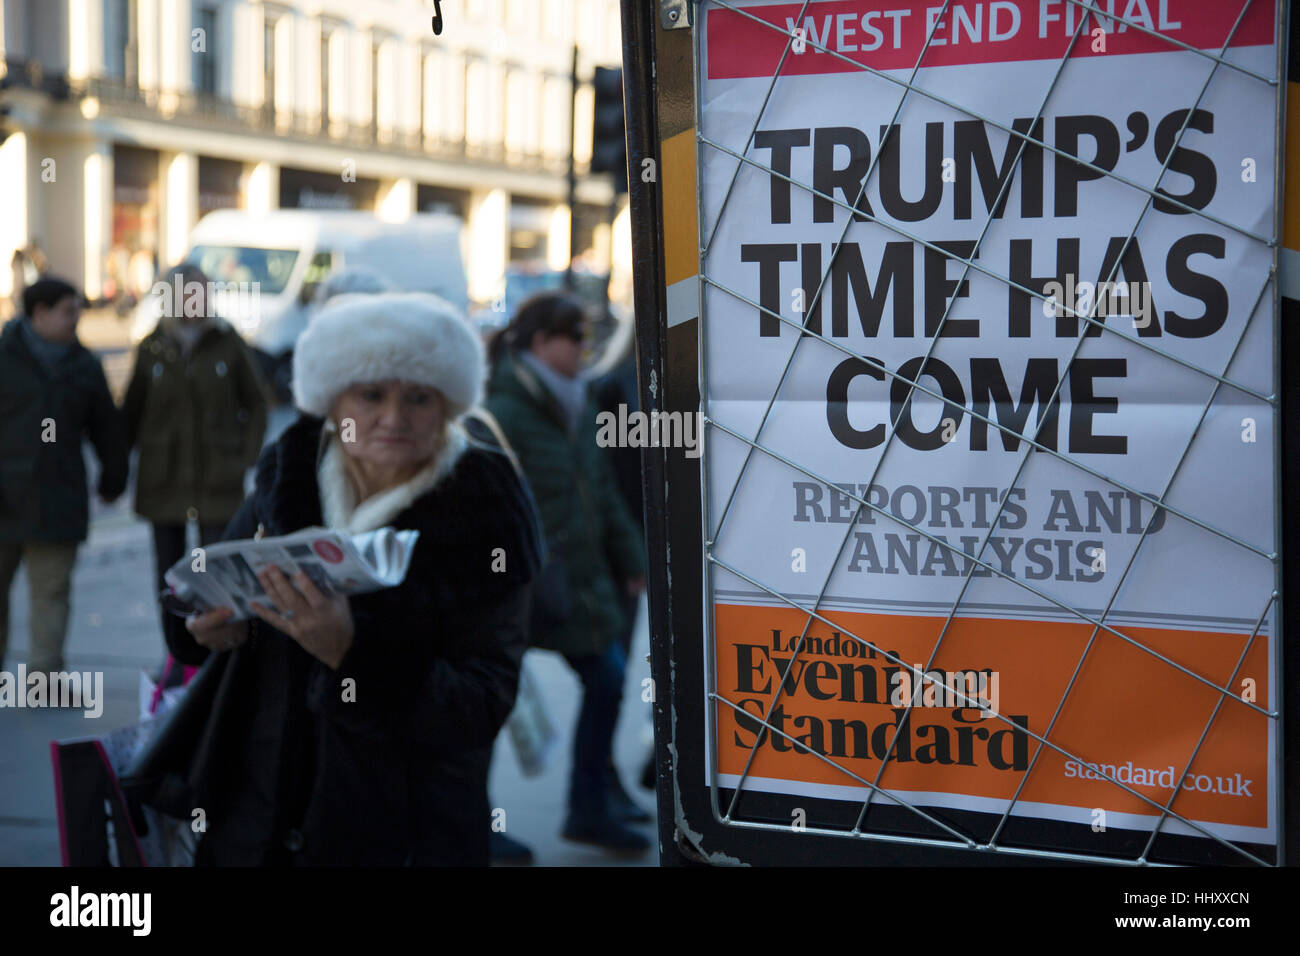 As the 45th US President is inaugurated in the USA, the headline on the Evening Standard newspaper reads Trumps time has come on 20th January 2017 in London, England, United Kingdom. President Donald Trump takes over as Commander in Chief on this day, and is one of the greatest upsets and shocks in political news history. Stock Photo